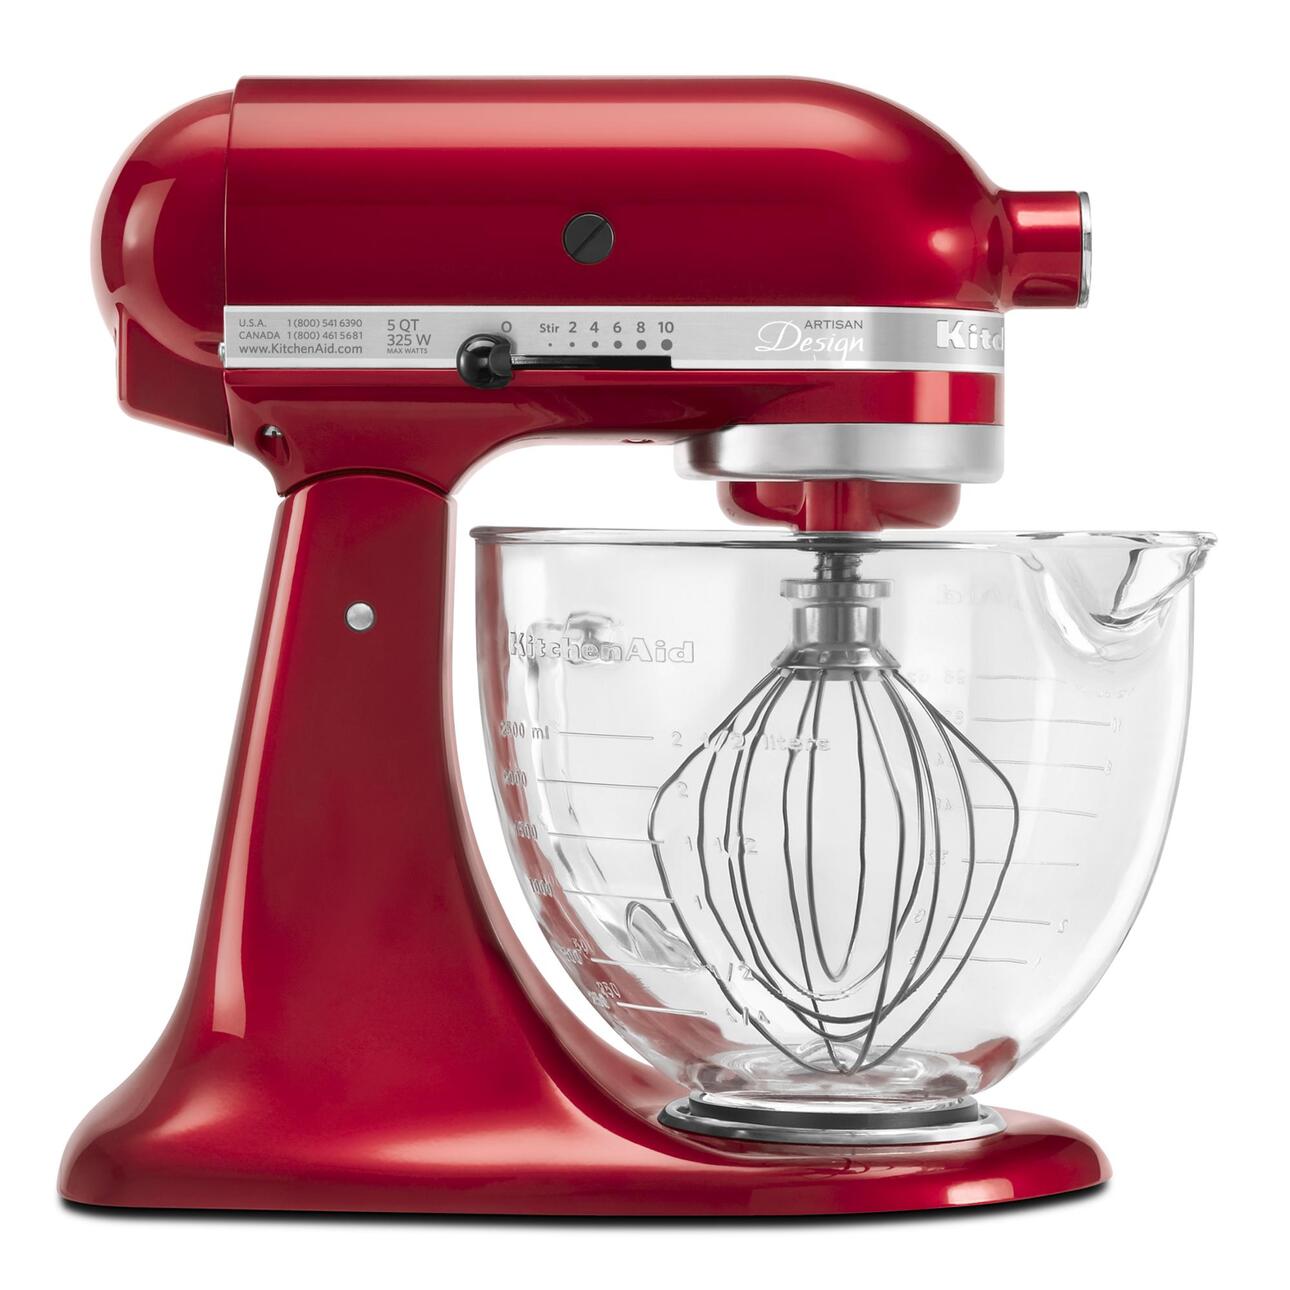 KitchenAid Artisan Design Series 5 Quart Tilt-Head Stand Mixer with Glass Bowl, Candy Apple Red, KSM155GB - image 1 of 7